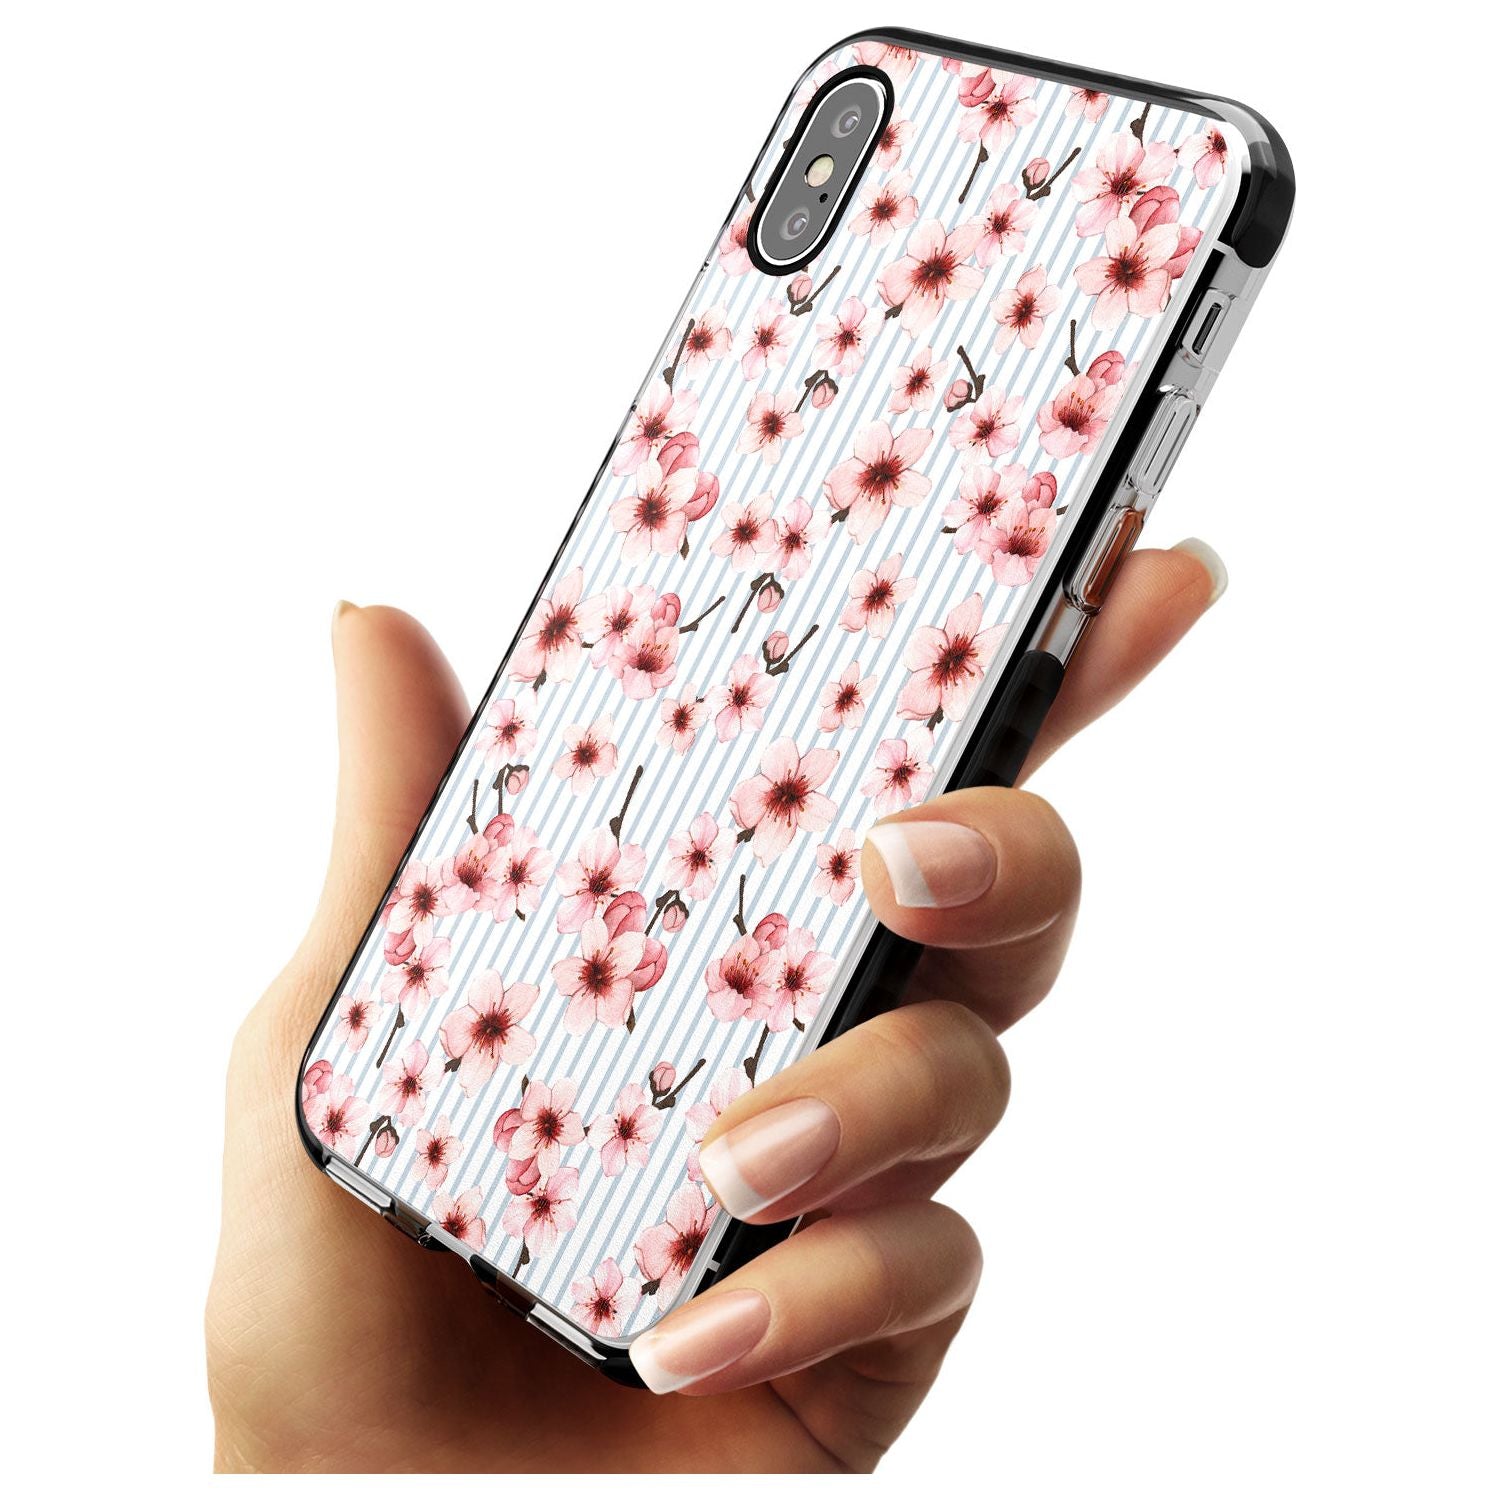 Cherry Blossoms on Blue Stripes Pattern Black Impact Phone Case for iPhone X XS Max XR